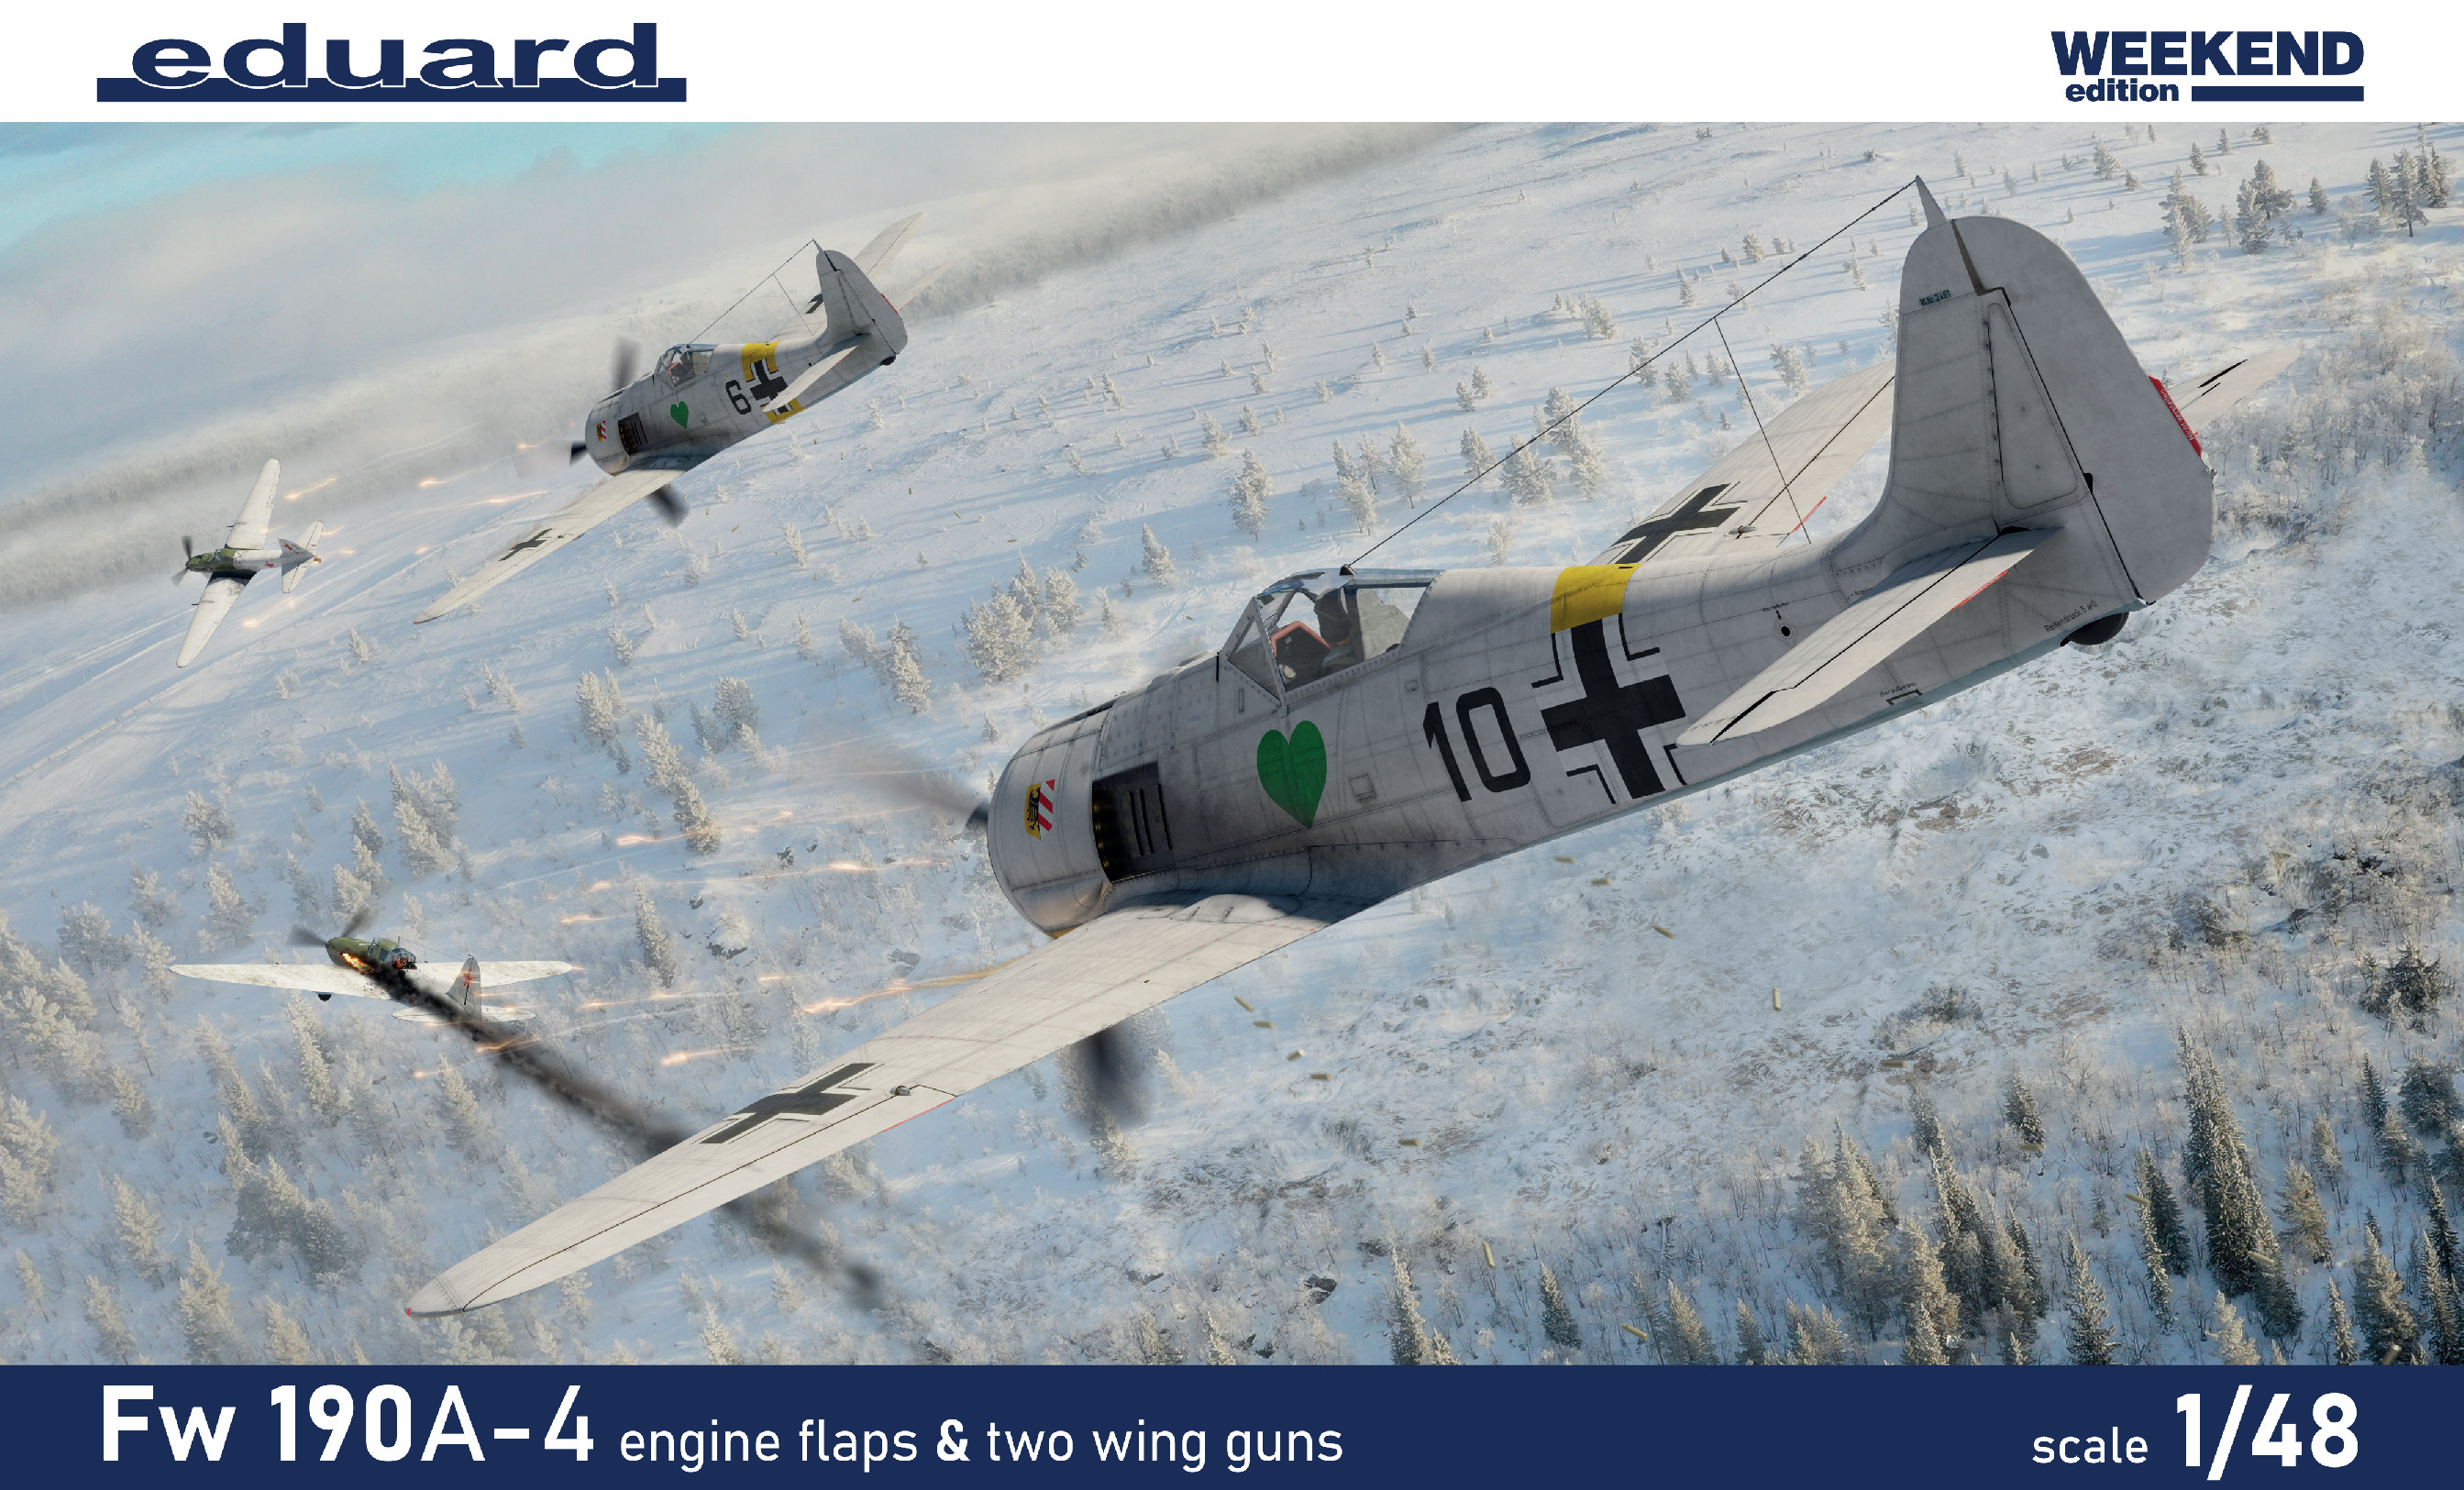 1/48 Fw 190A-4 w/ engine flaps & 2-gun wings (Weekend edition)